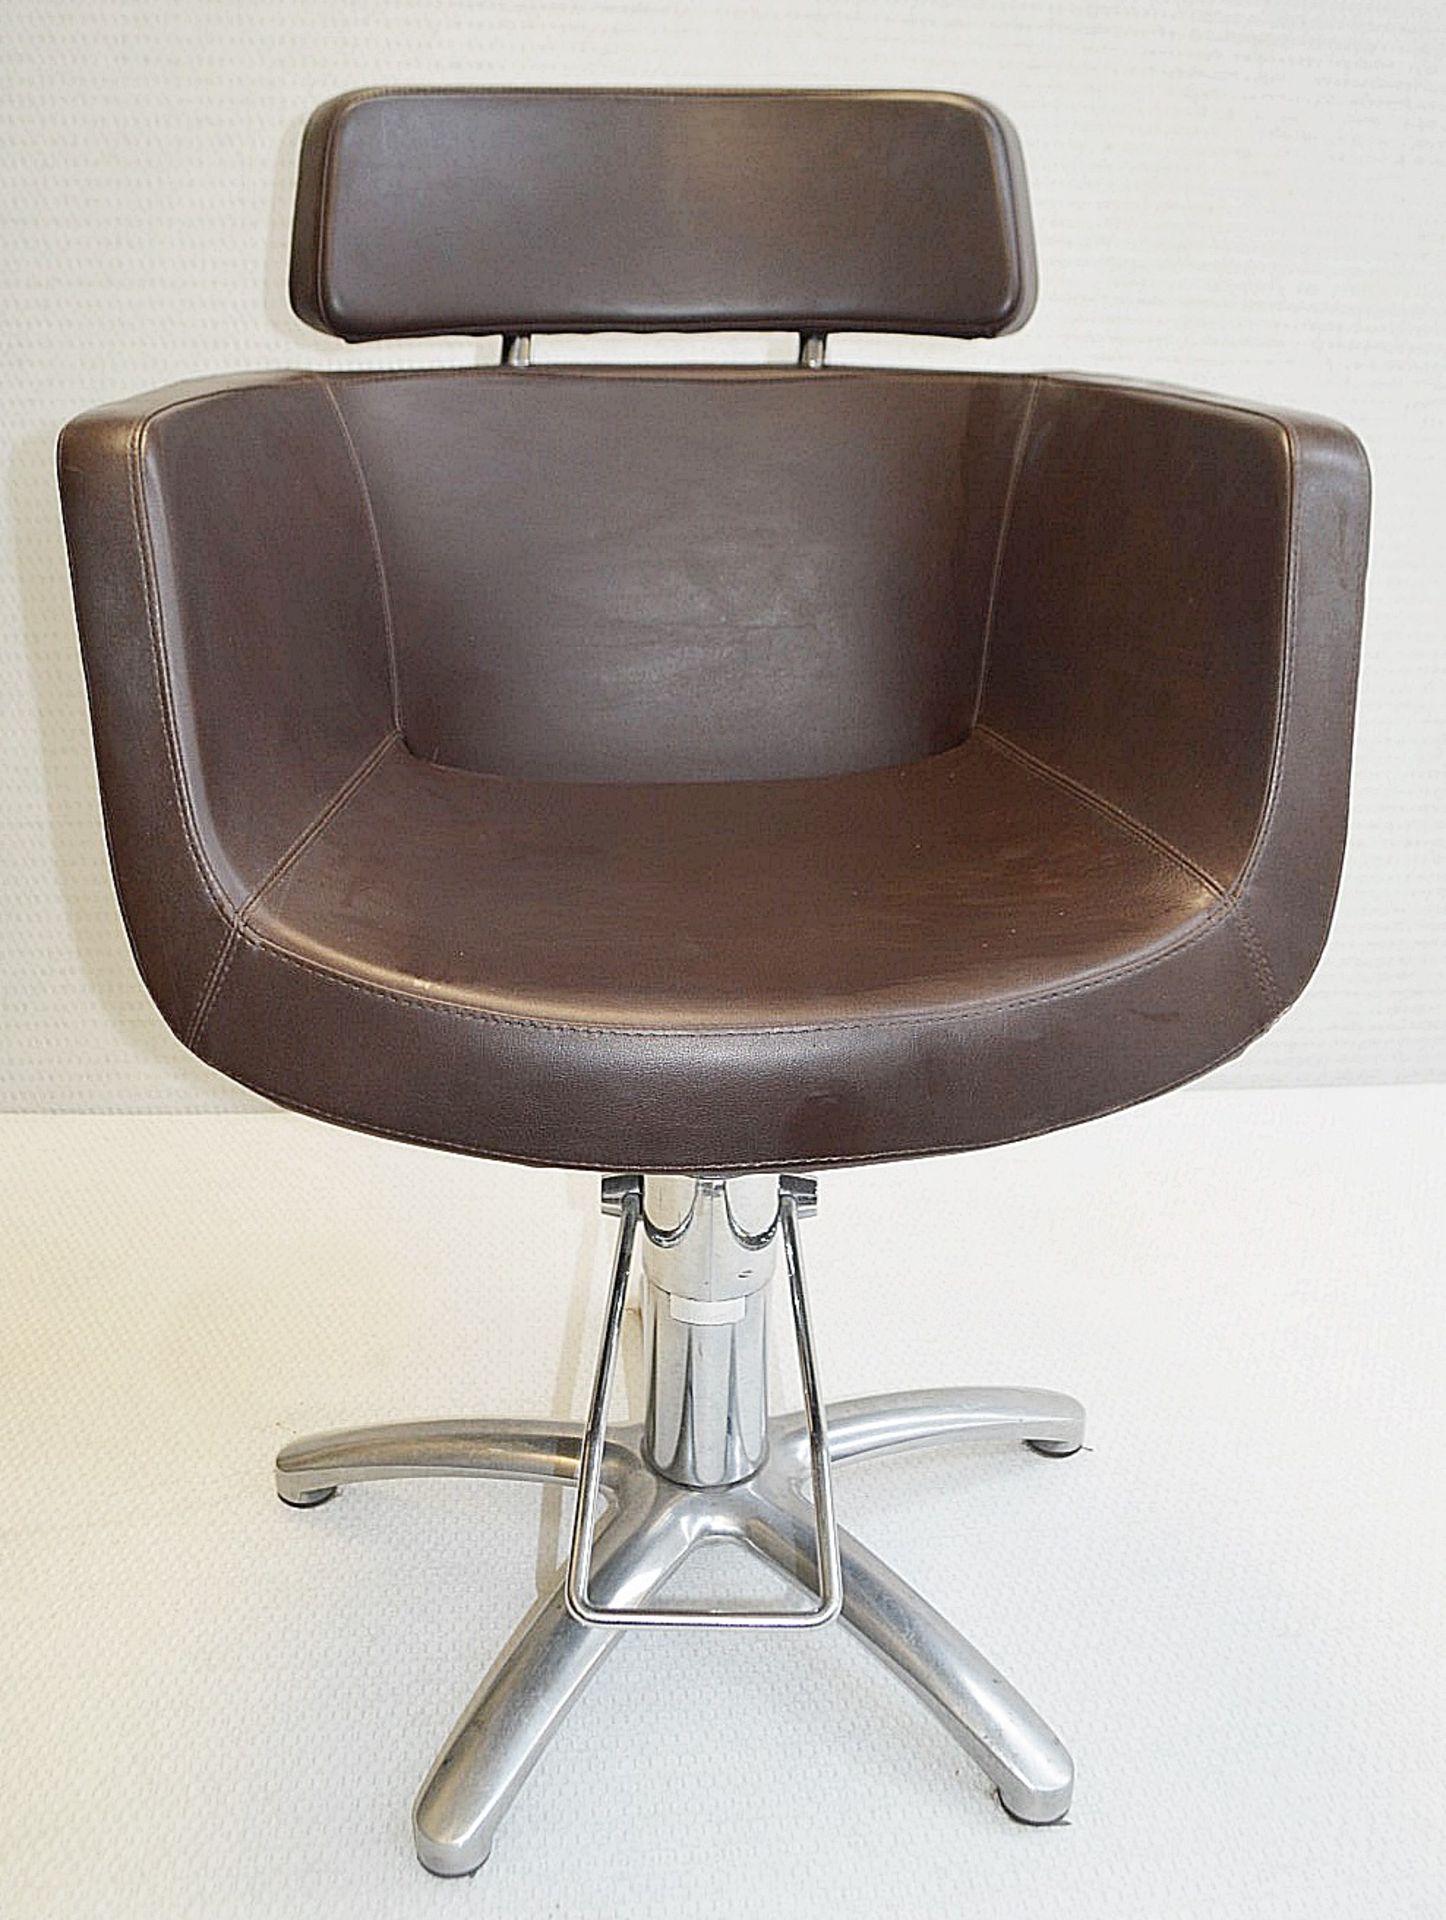 5 x Malet Branded Professional Hairdressing Salon Swivel Chairs In Brown - Includes 4 x Foot Rests - Image 2 of 7